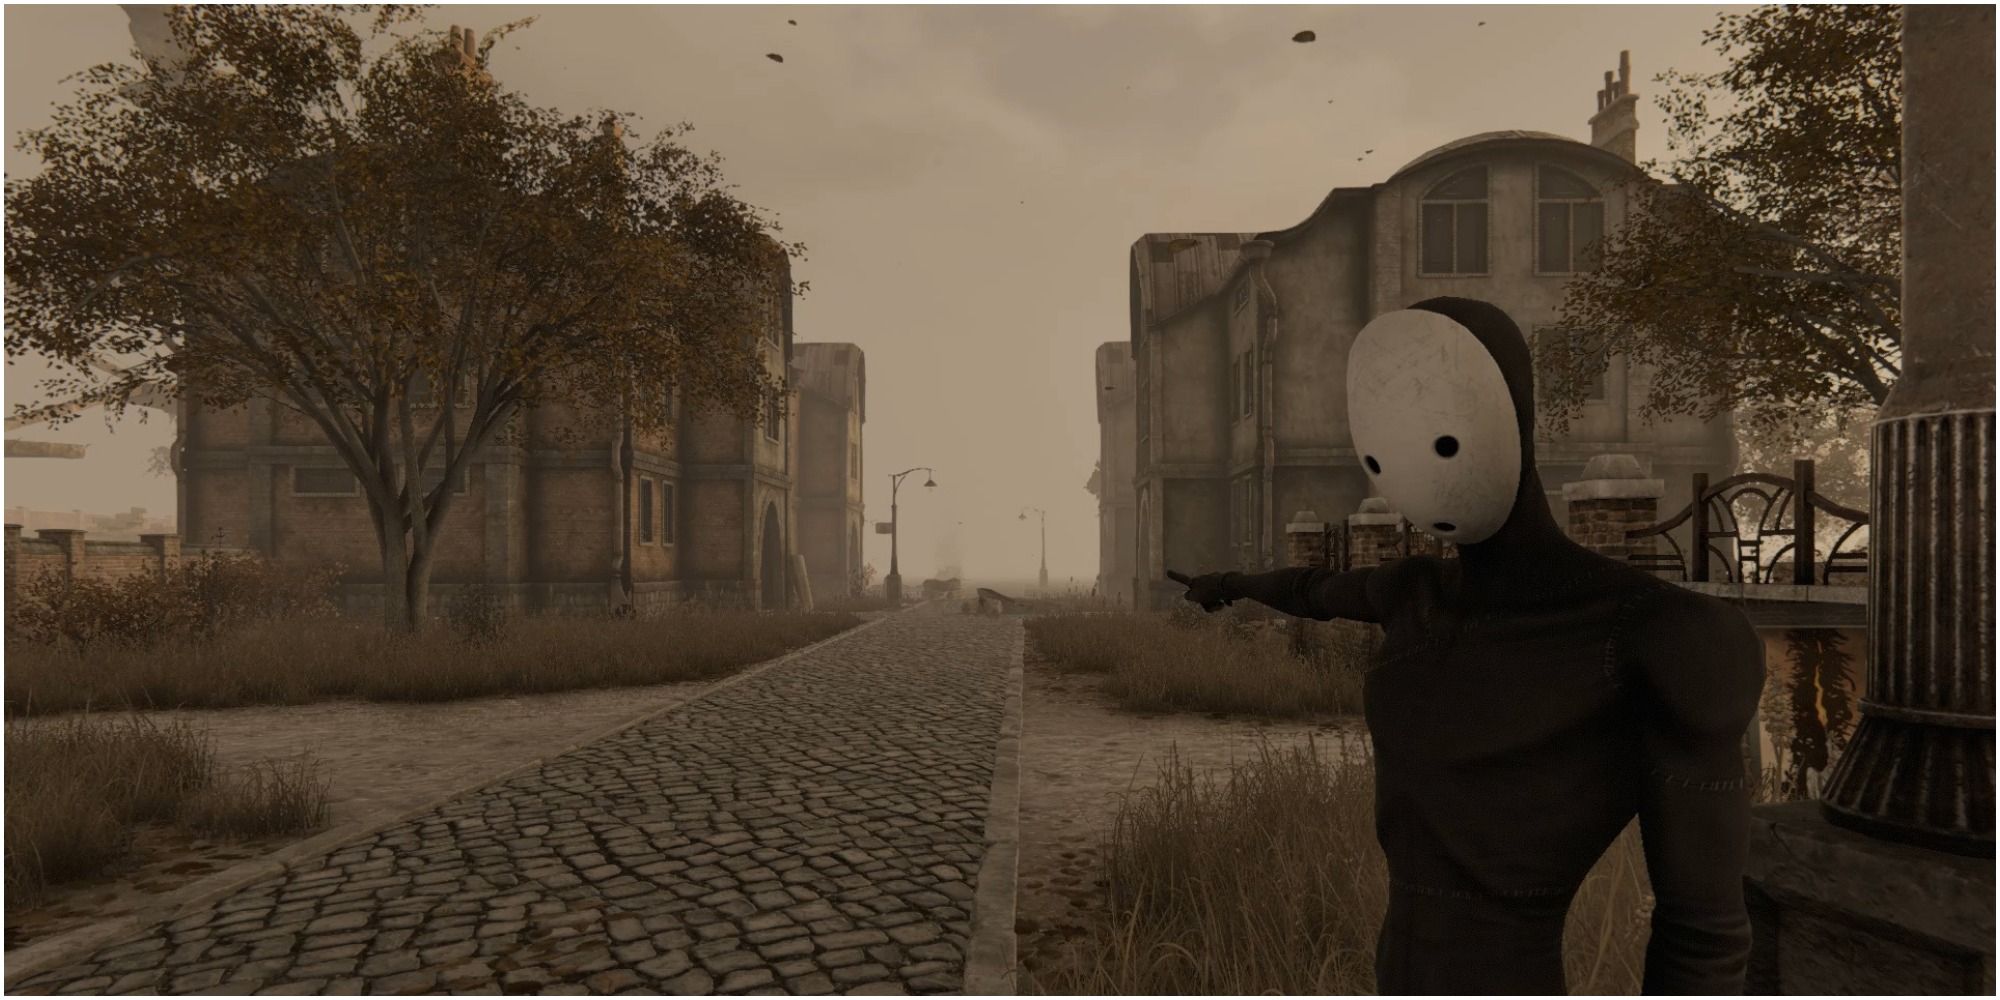 A character from Pathologic pointing into the distance